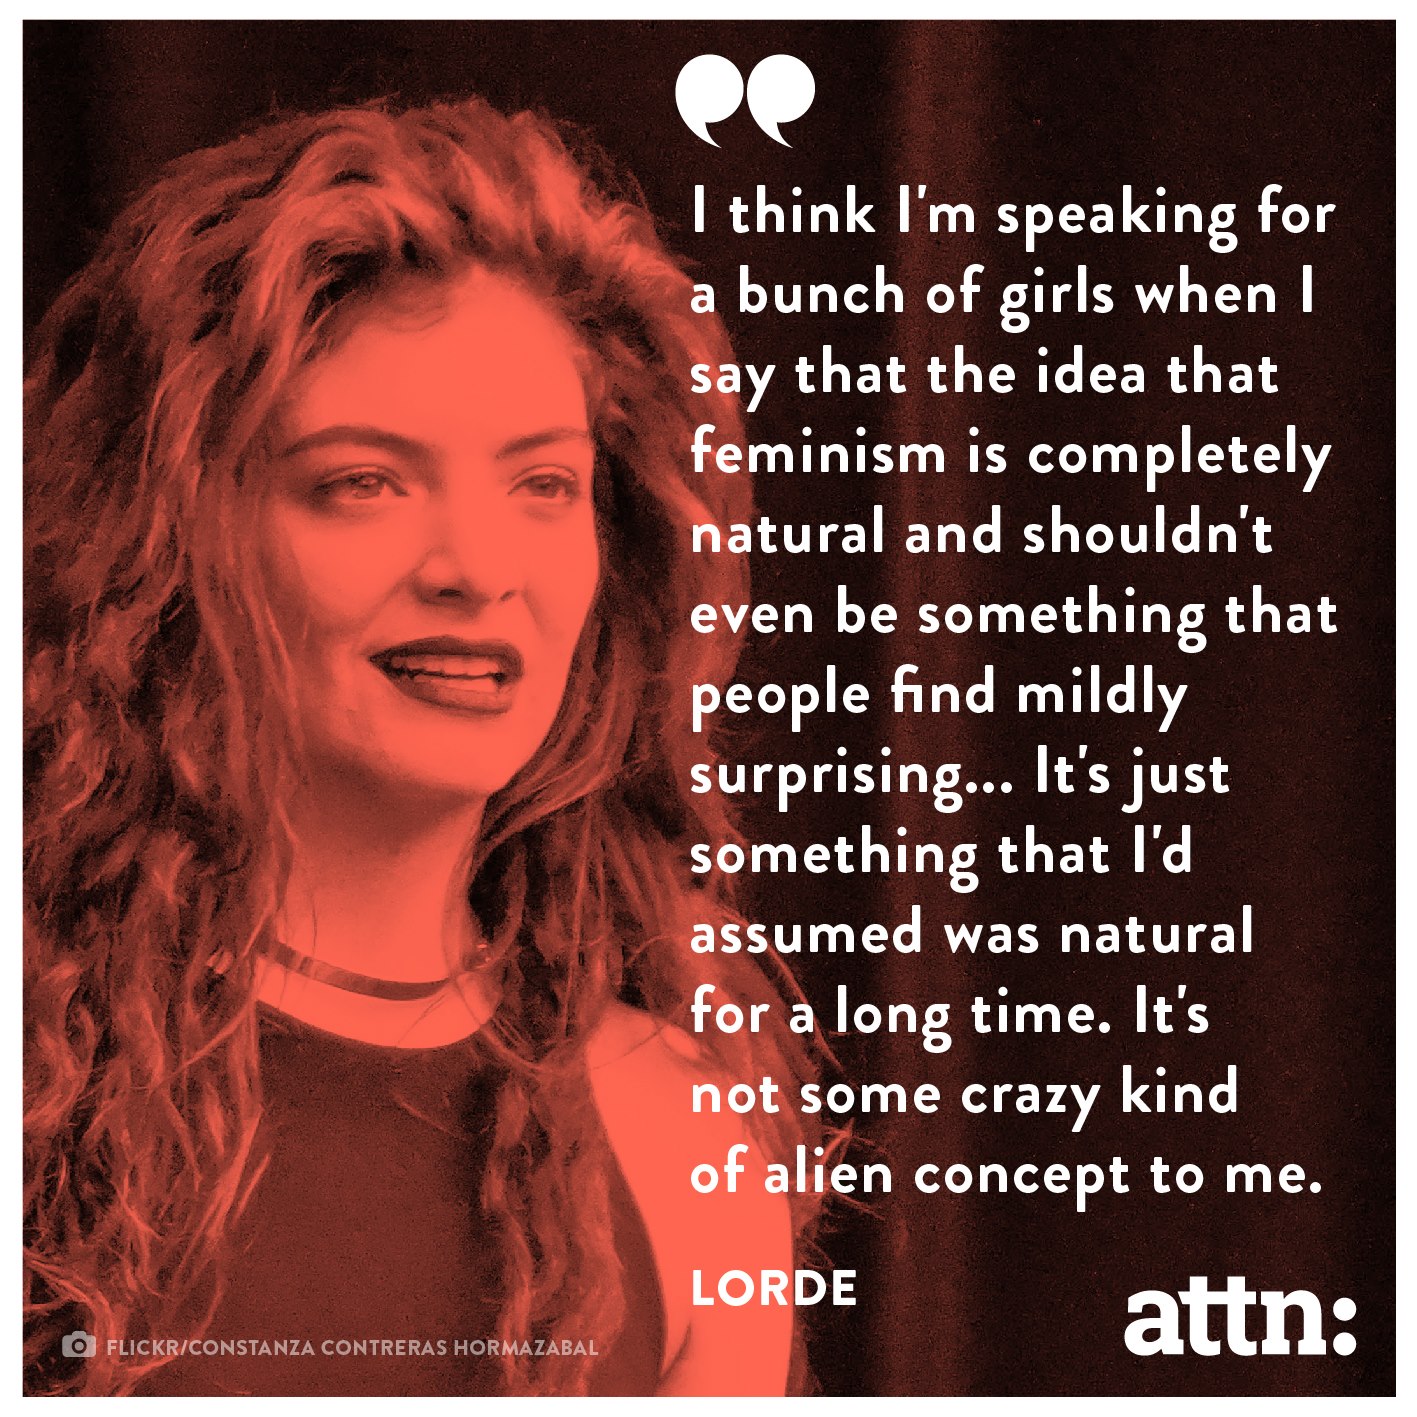 Lorde nails it with this feminist quote